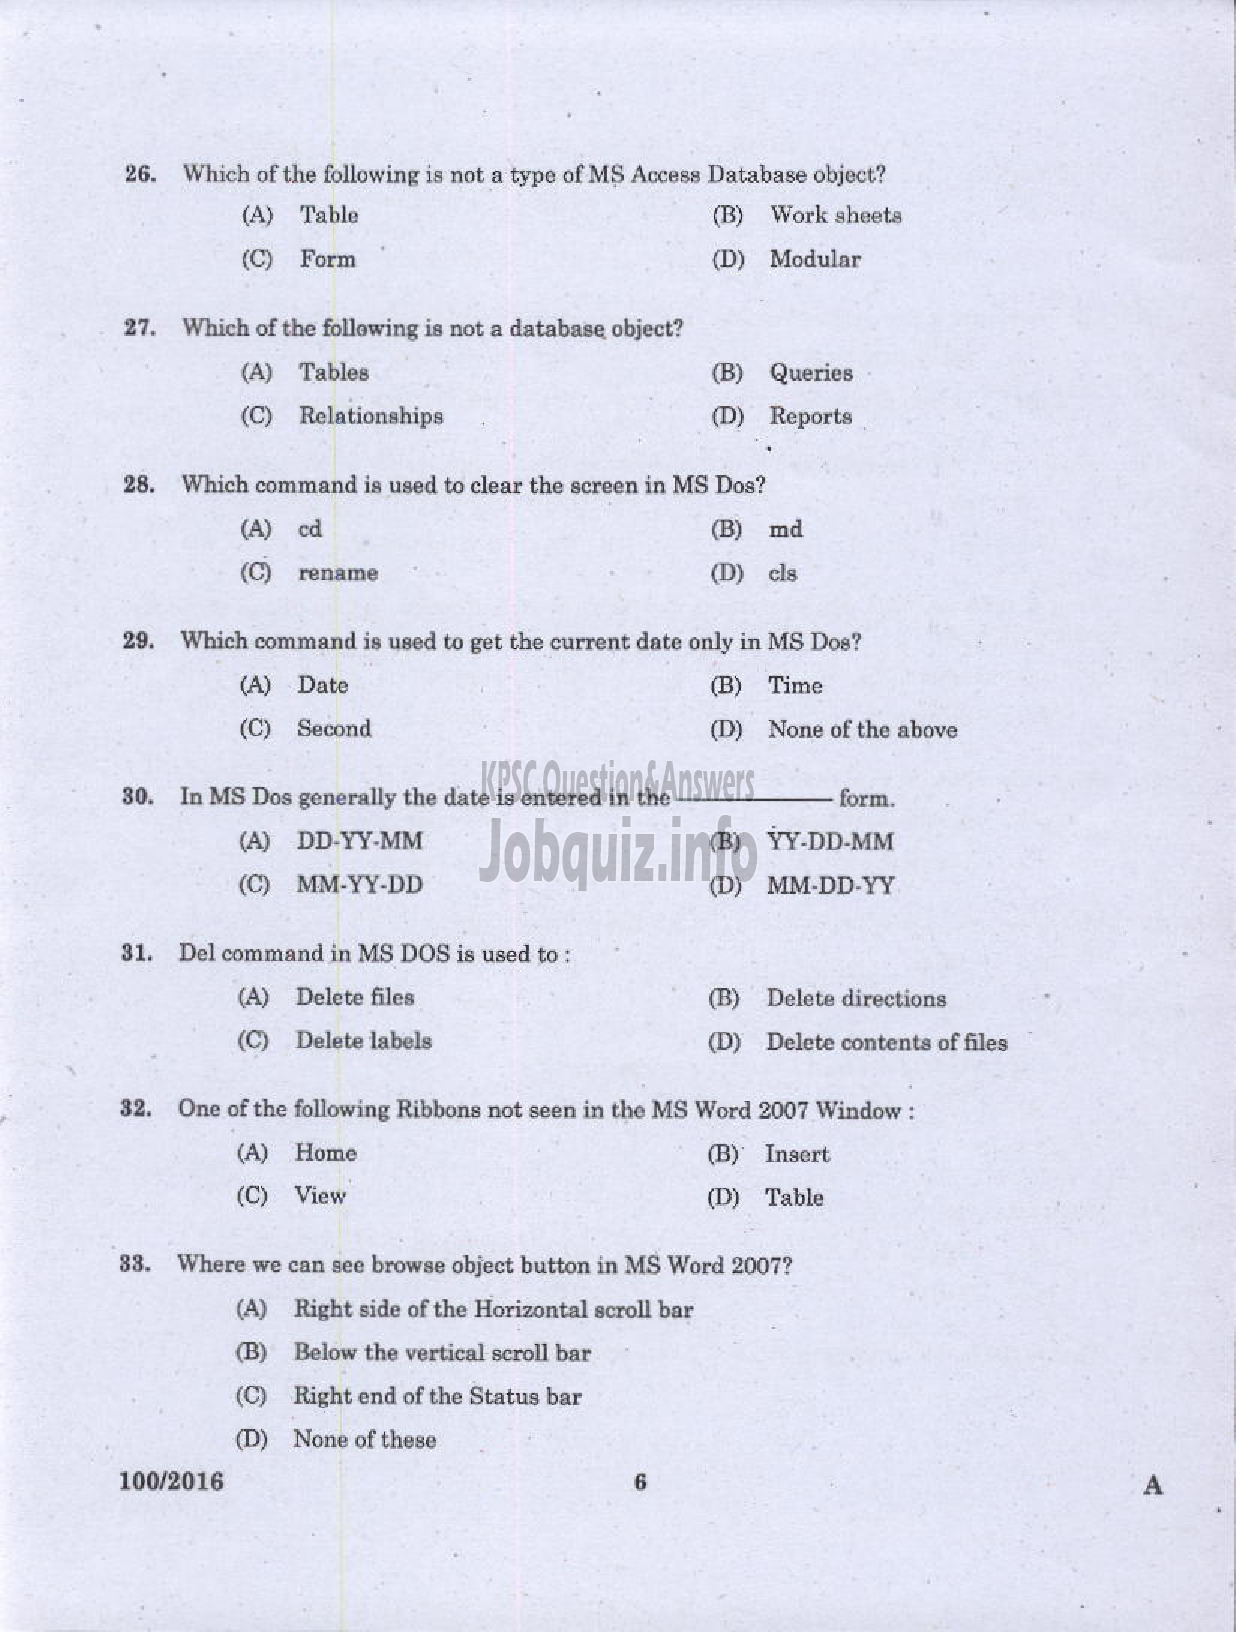 Kerala PSC Question Paper - DATA ENTRY OPERATOR DCB-4